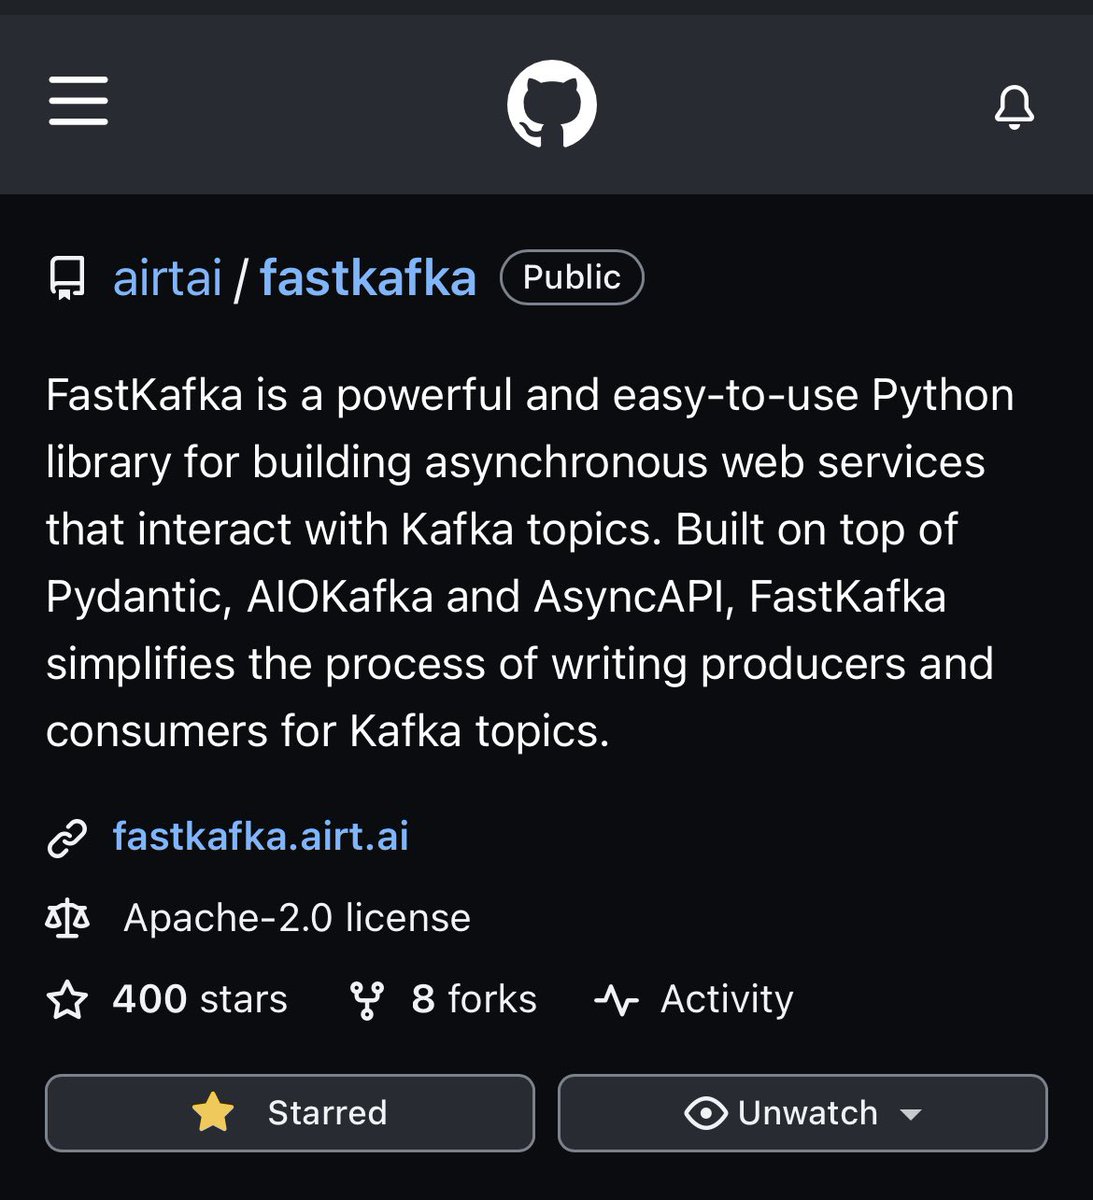 OMG! 🤩 400th star on #GitHub! 🌟🌟🌟

Thanks to all contributors and users of #FastKafka. Your support is greatly appreciated & your feedback has been invaluable! 🙌

FastKafka: bit.ly/FastKafka
Discord: bit.ly/airtdiscord

#Python #Kafka #devtool #datainmotion